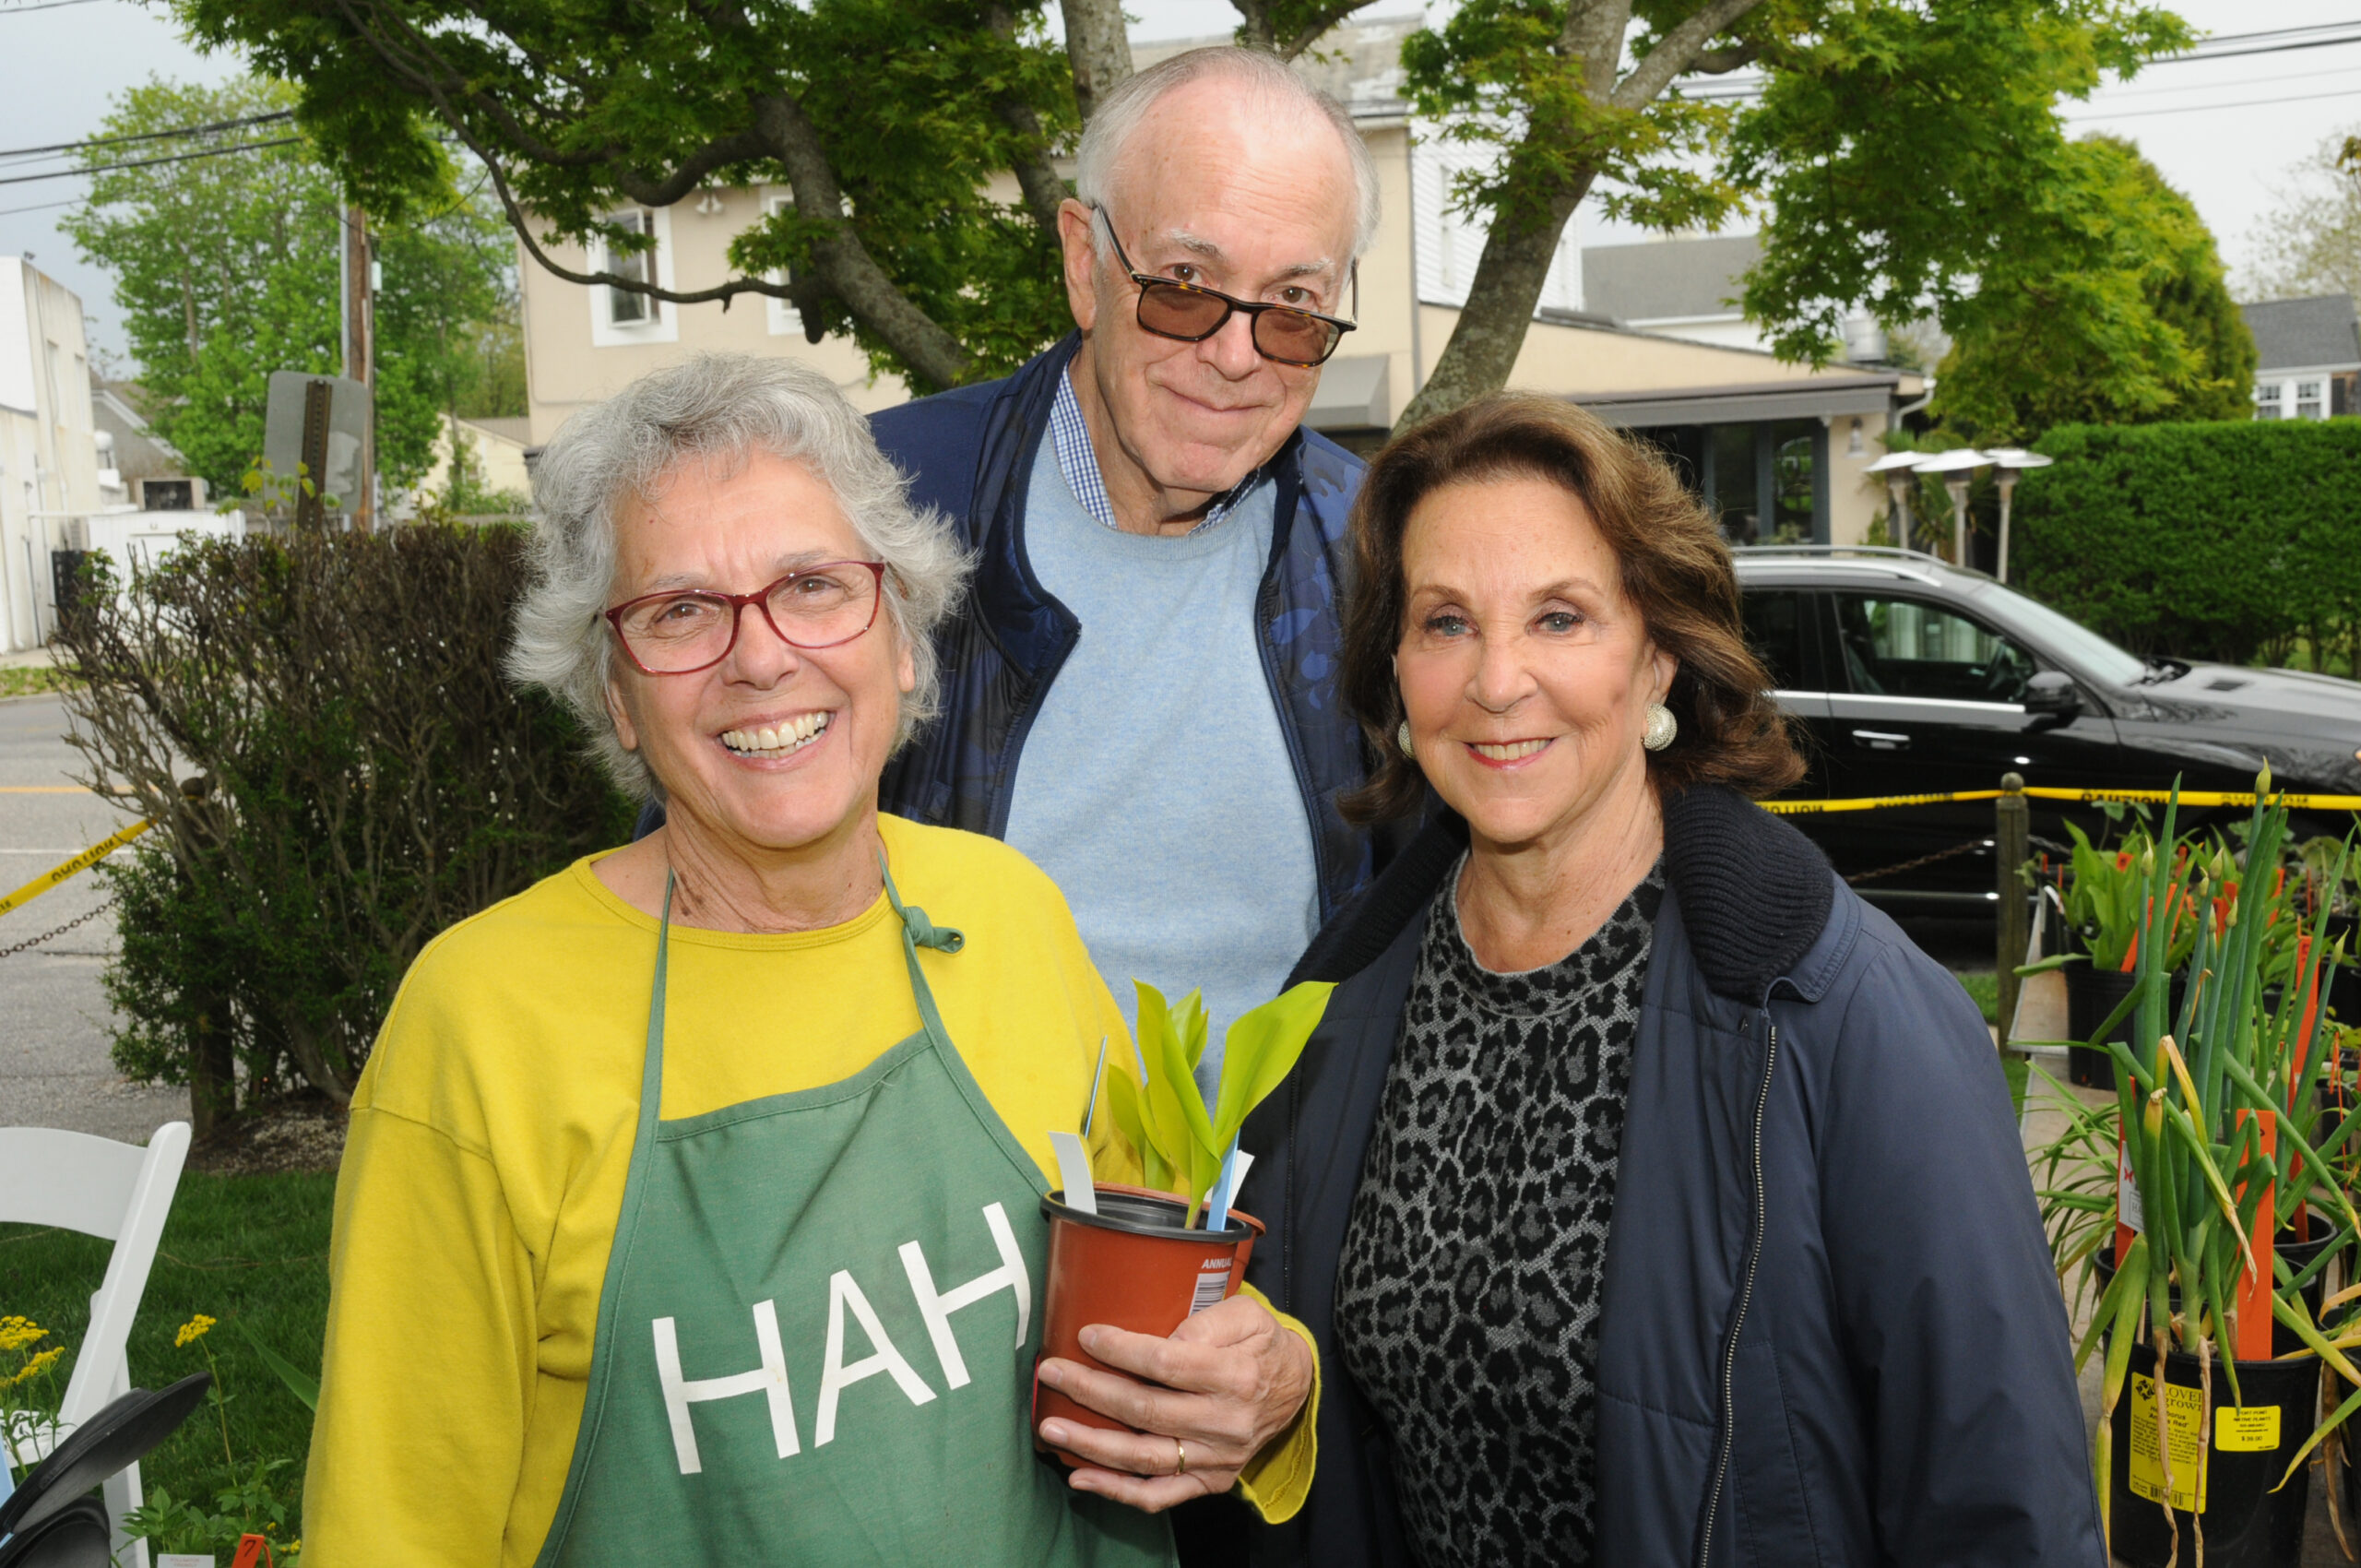 Horticultural Alliance (H.A.H.) Treasurer Bettina Benson with Roger and Bambi Felberbaum at the return of the Horticultural Alliance of the Hamptons  annual Spring Garden Fair and Plant Sale at the Bridgehampton Community House on Friday. Members and other VIP's had first choice from the wide variety of plants, before General Admission on Saturday. Radio Flyer red wagons were on hand for the big buyers. Rick Bogusch, H.A.H. Second Vice President, and Director of Bridge Gardens, was this year's Honoree.     RICHARD LEWIN